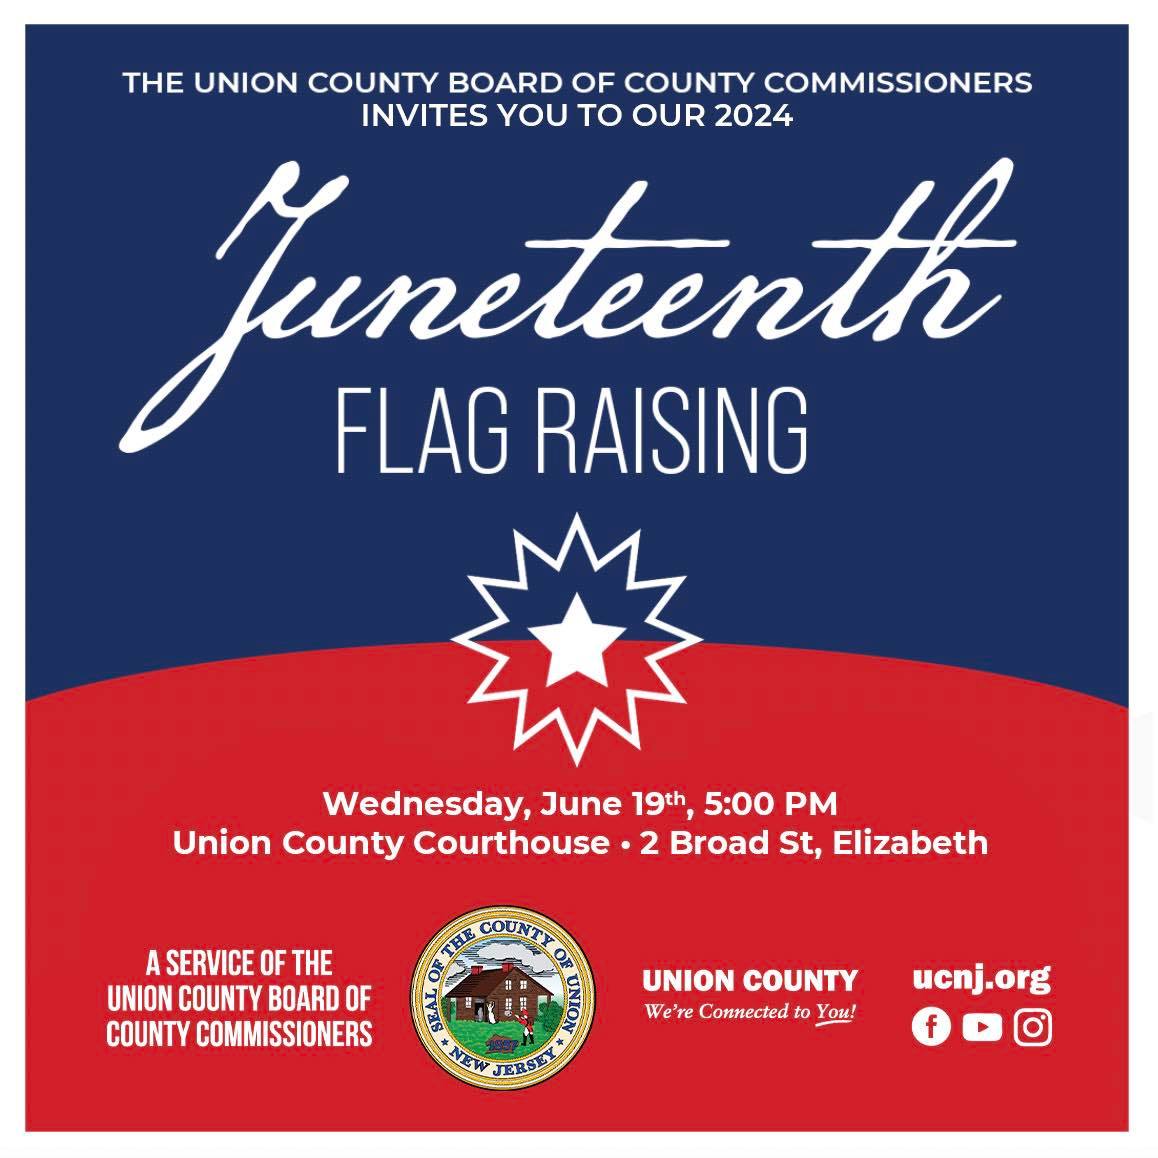 Union County to Celebrate Juneteenth With a Flag Raising Ceremony